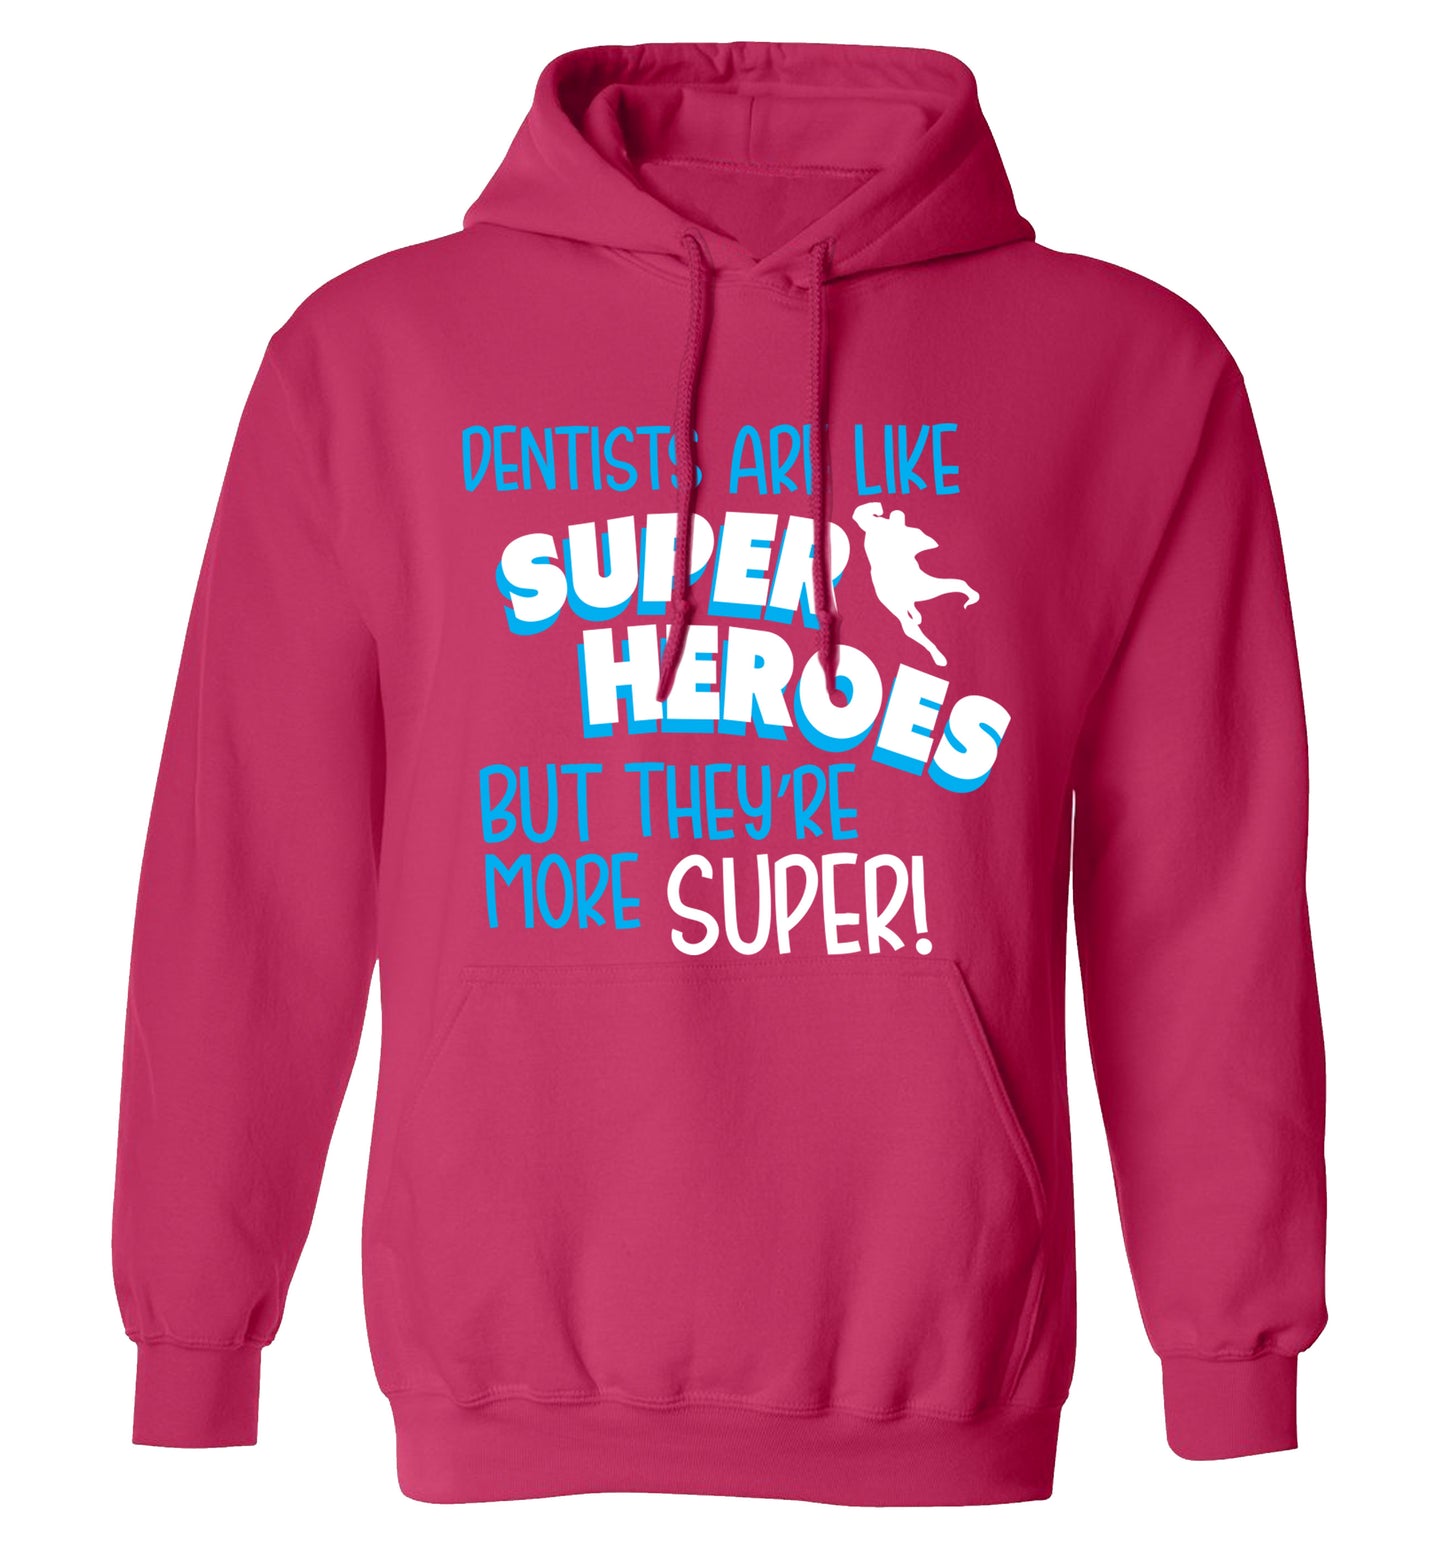 Dentists are like superheros but they're more super adults unisex pink hoodie 2XL